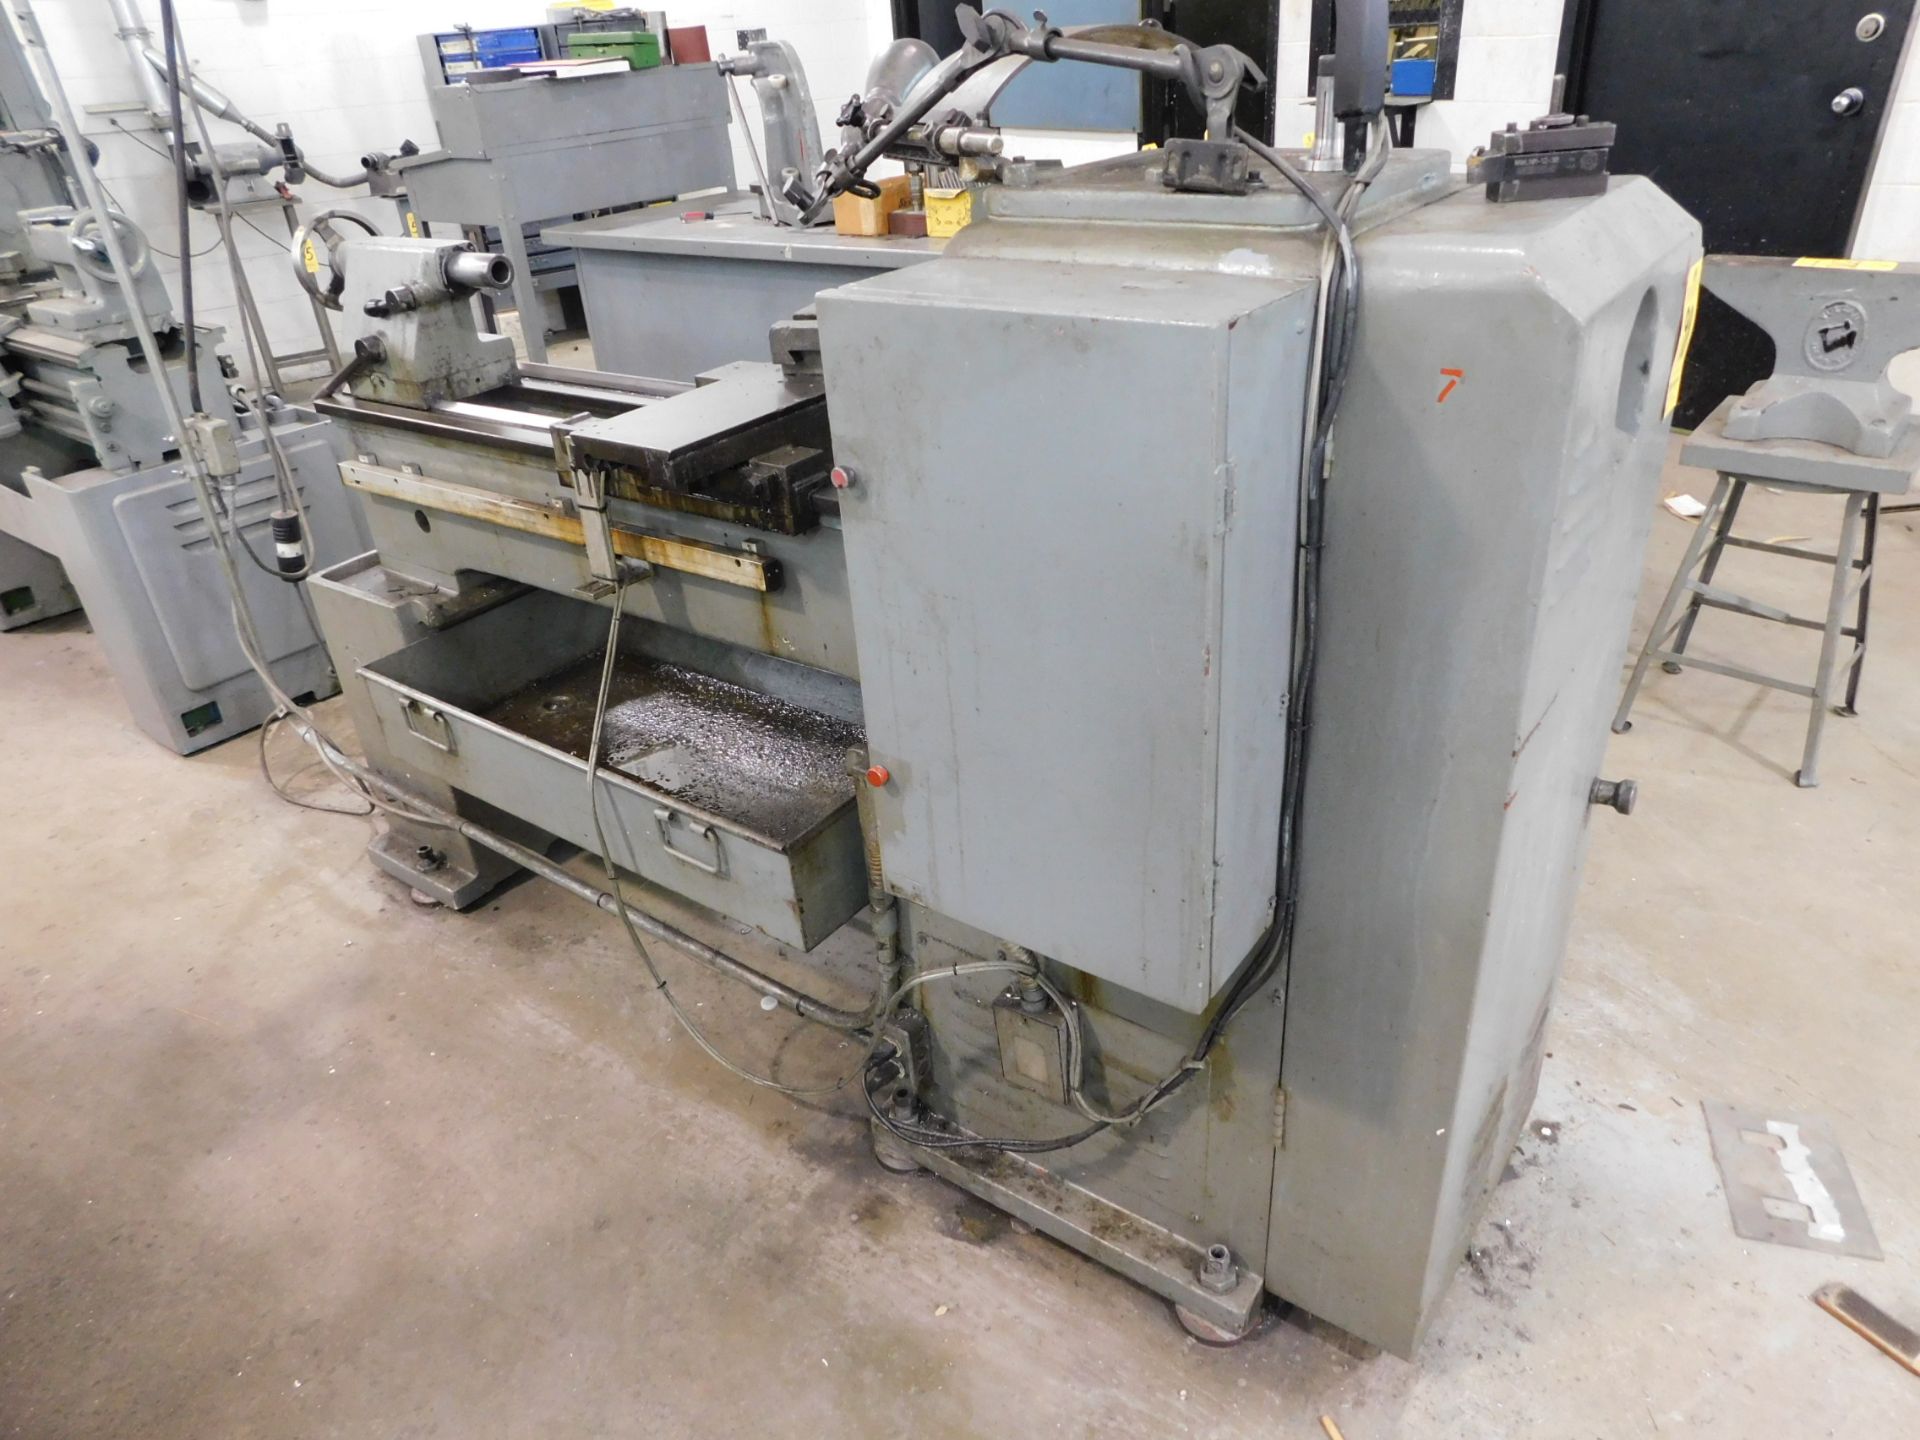 South Bend 400 16" x 36" Toolroom Lathe, SN 020230, with Anilam Wizard 411 2-Axis Digital Readout - Image 10 of 15